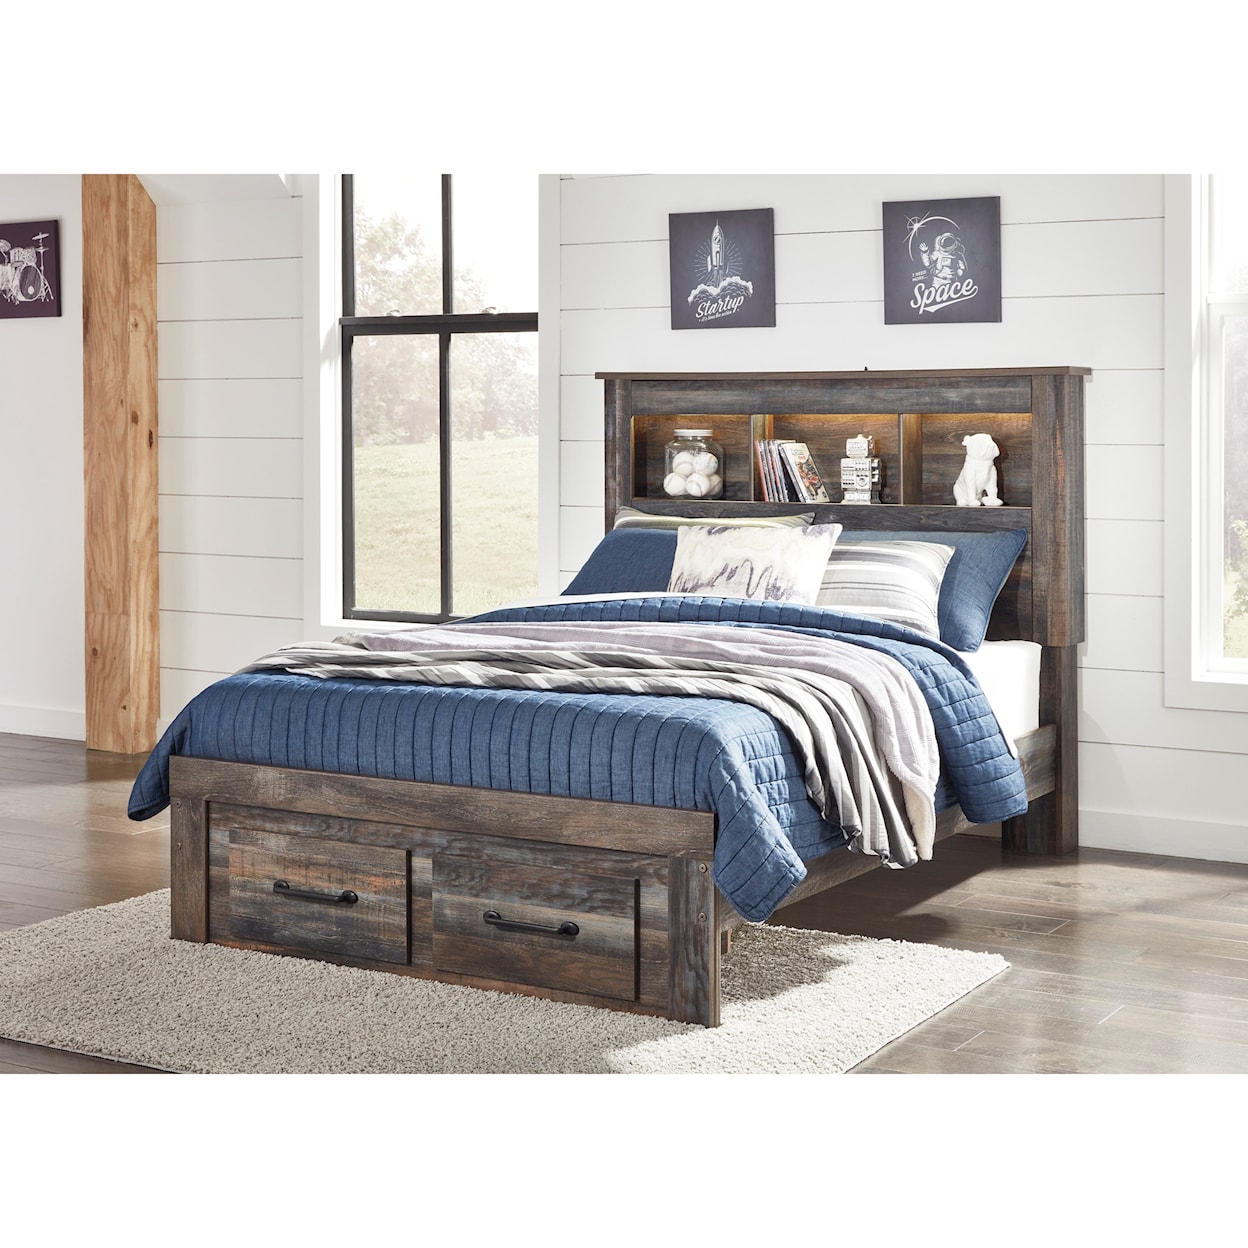 Ashley Signature Design Drystan Full Bookcase Bed with Footboard Drawers